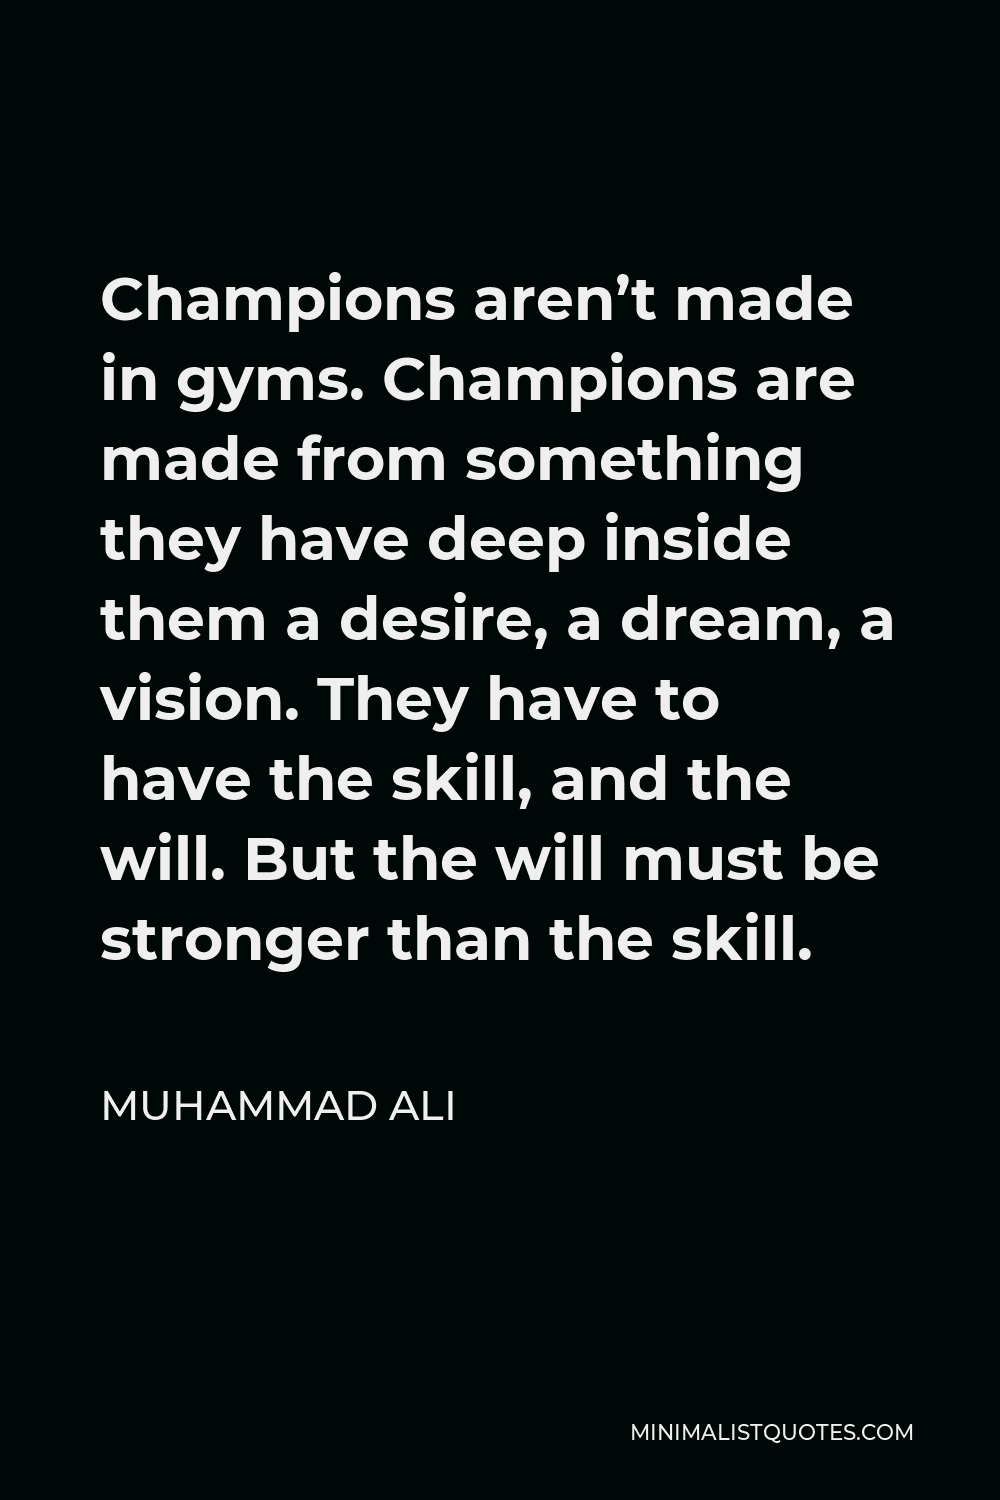 Muhammad Ali Quote: Champions aren't made in gyms. Champions are made from  something they have deep inside them a desire, a dream, a vision. They have  to have the skill, and the